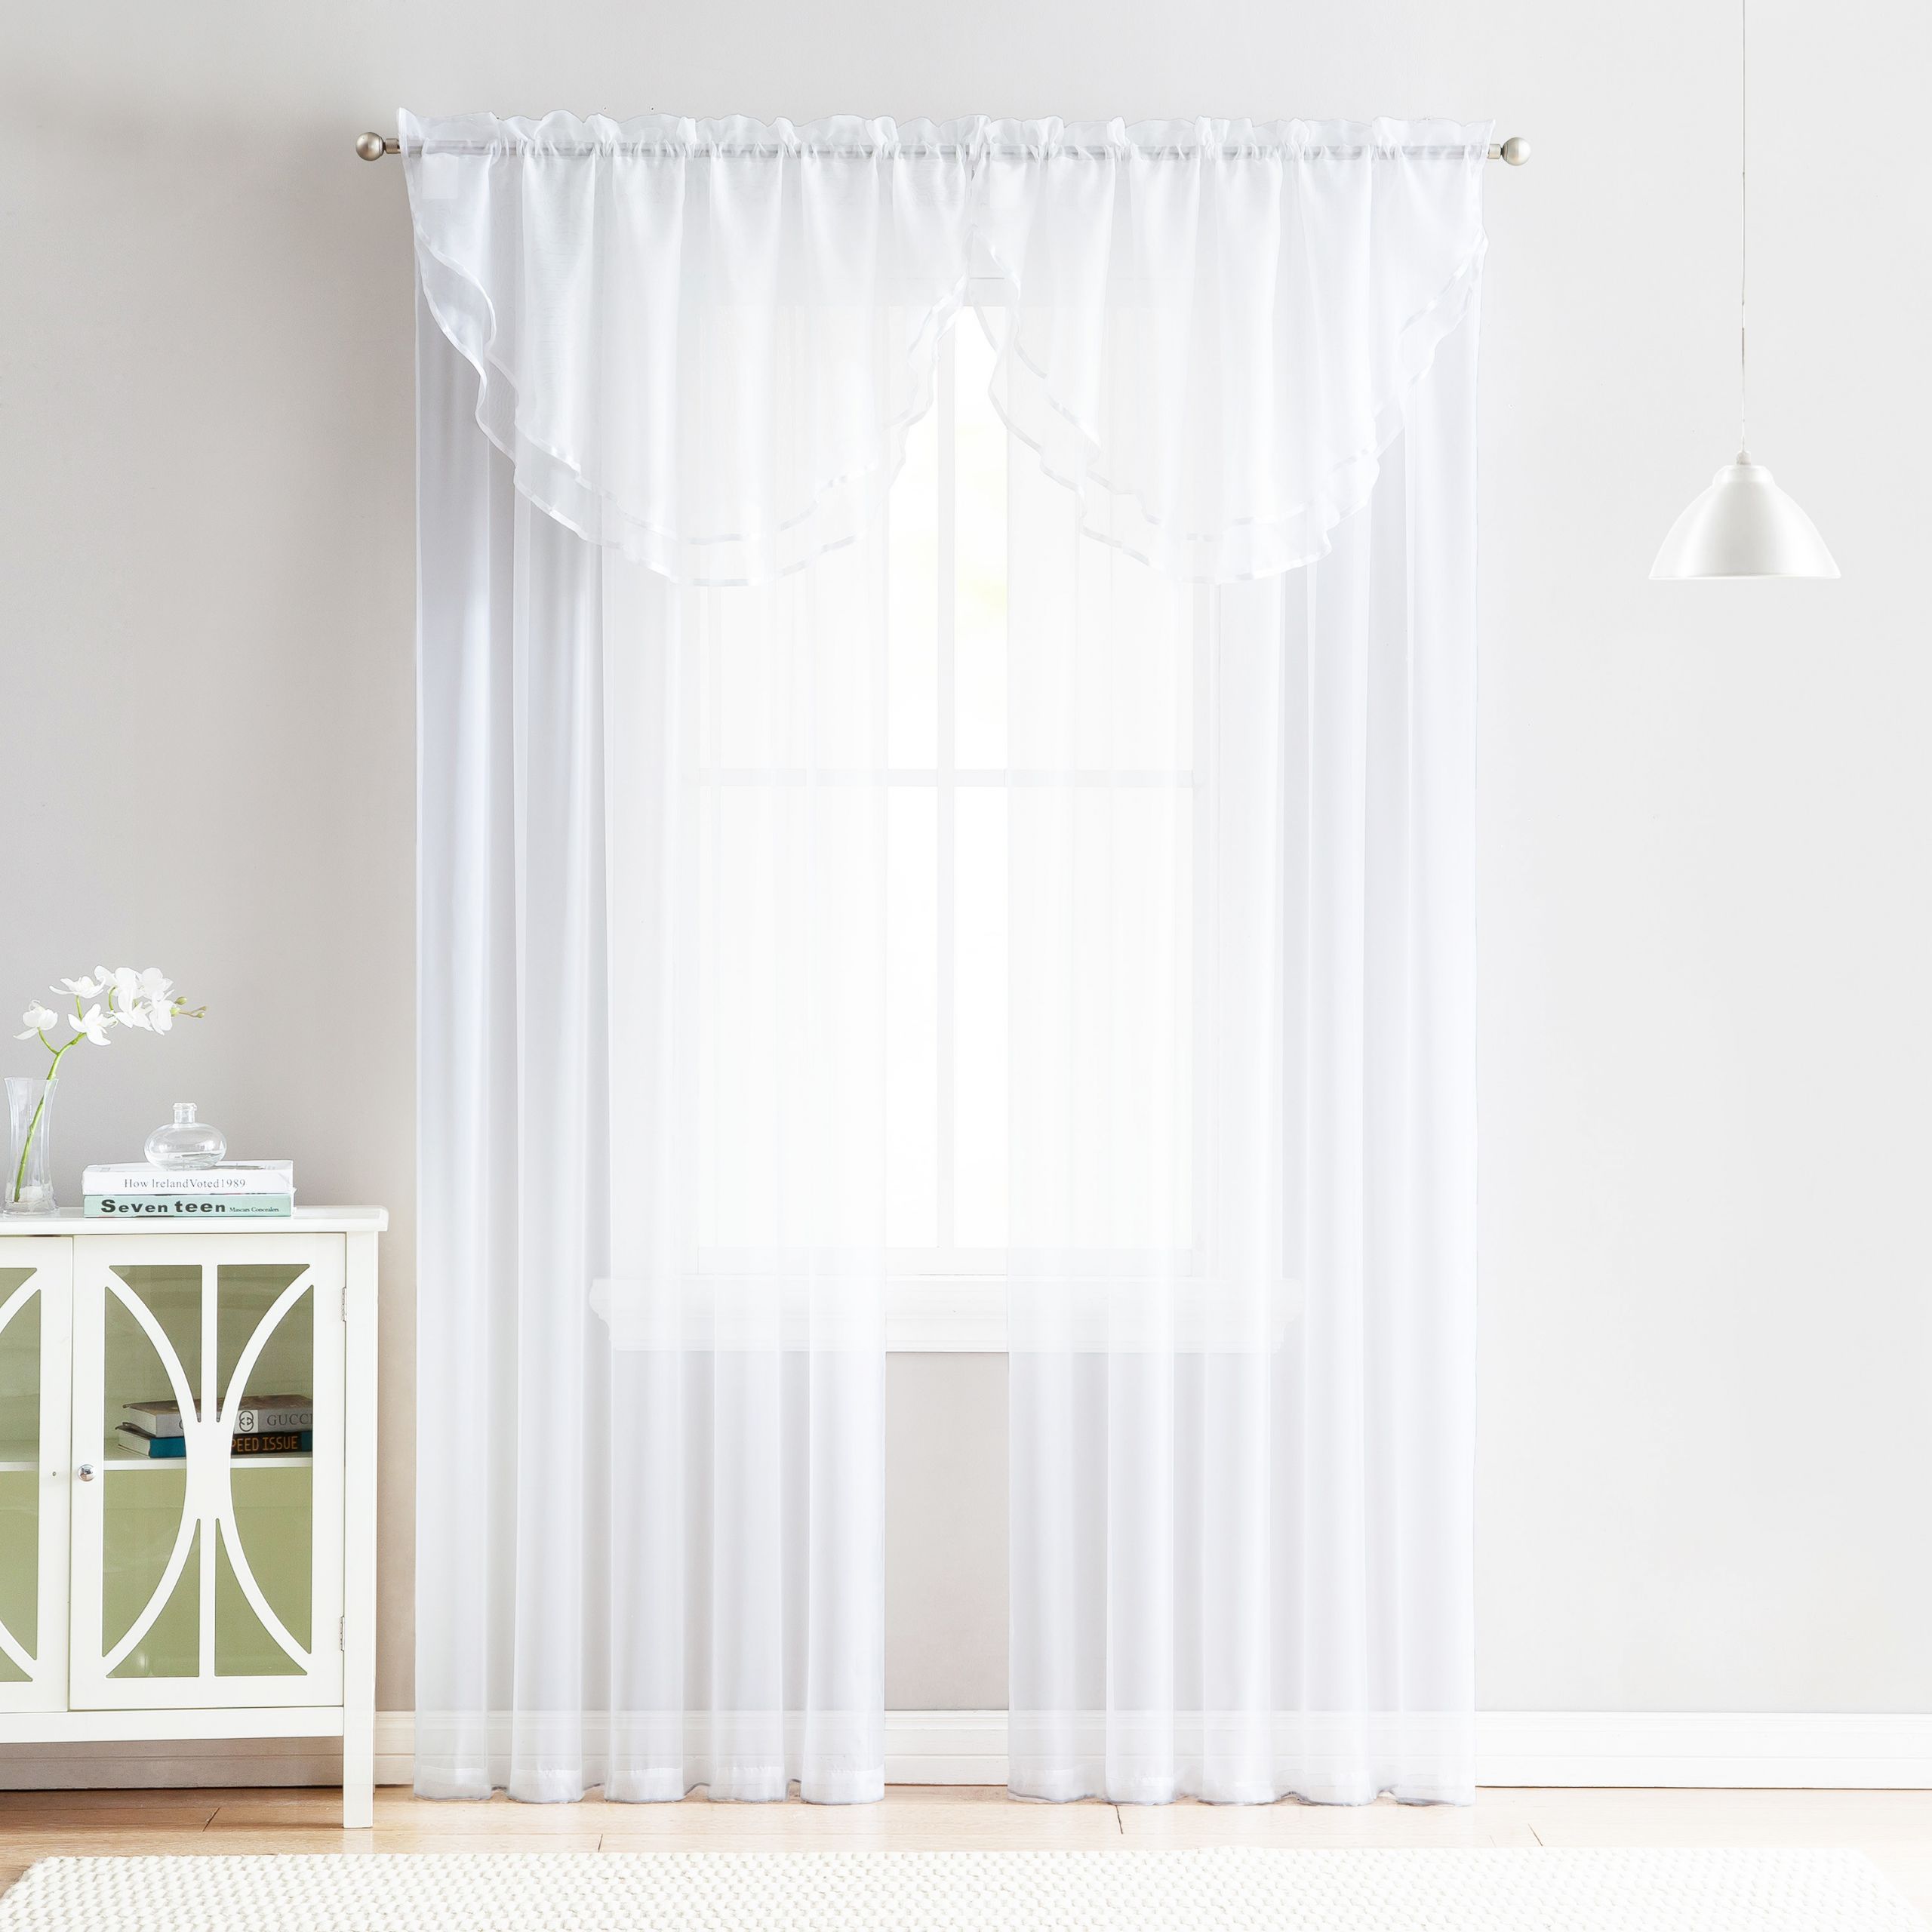 Walmart Curtains For Living Room
 4 Piece Sheer Window Curtain Set for Living Room Dining